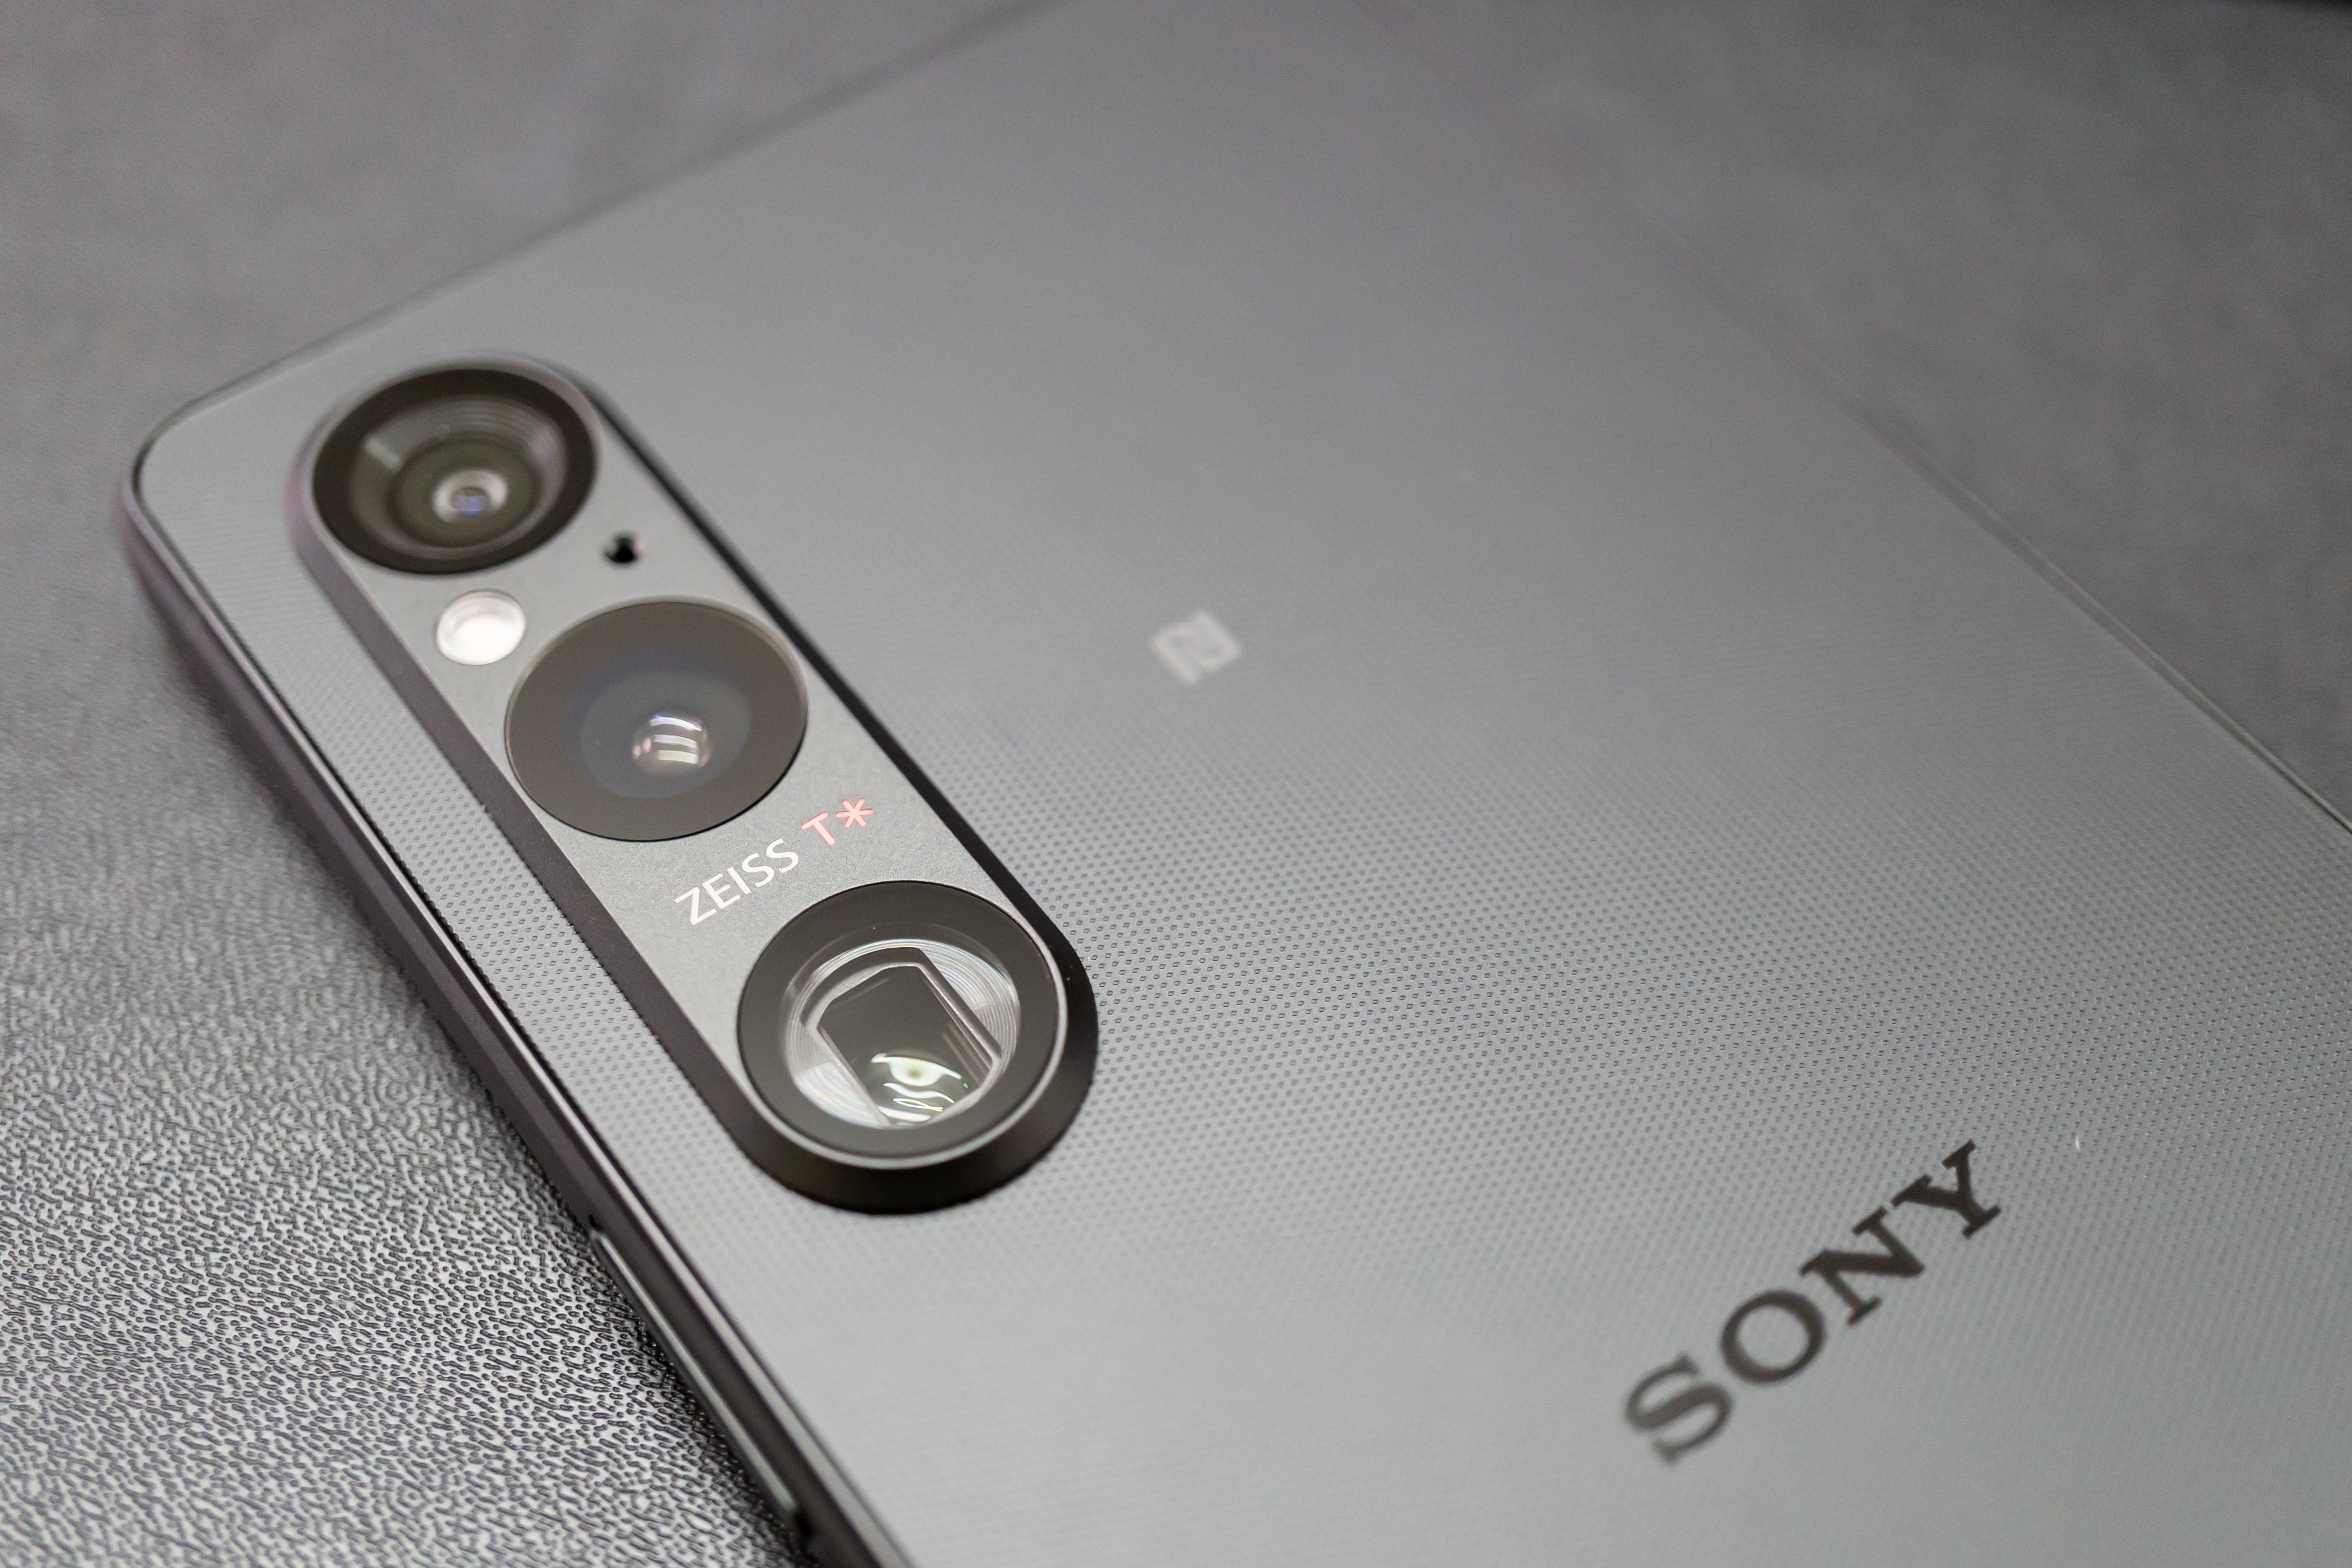 Sony Xperia 1V reviews: What to consider before purchasing